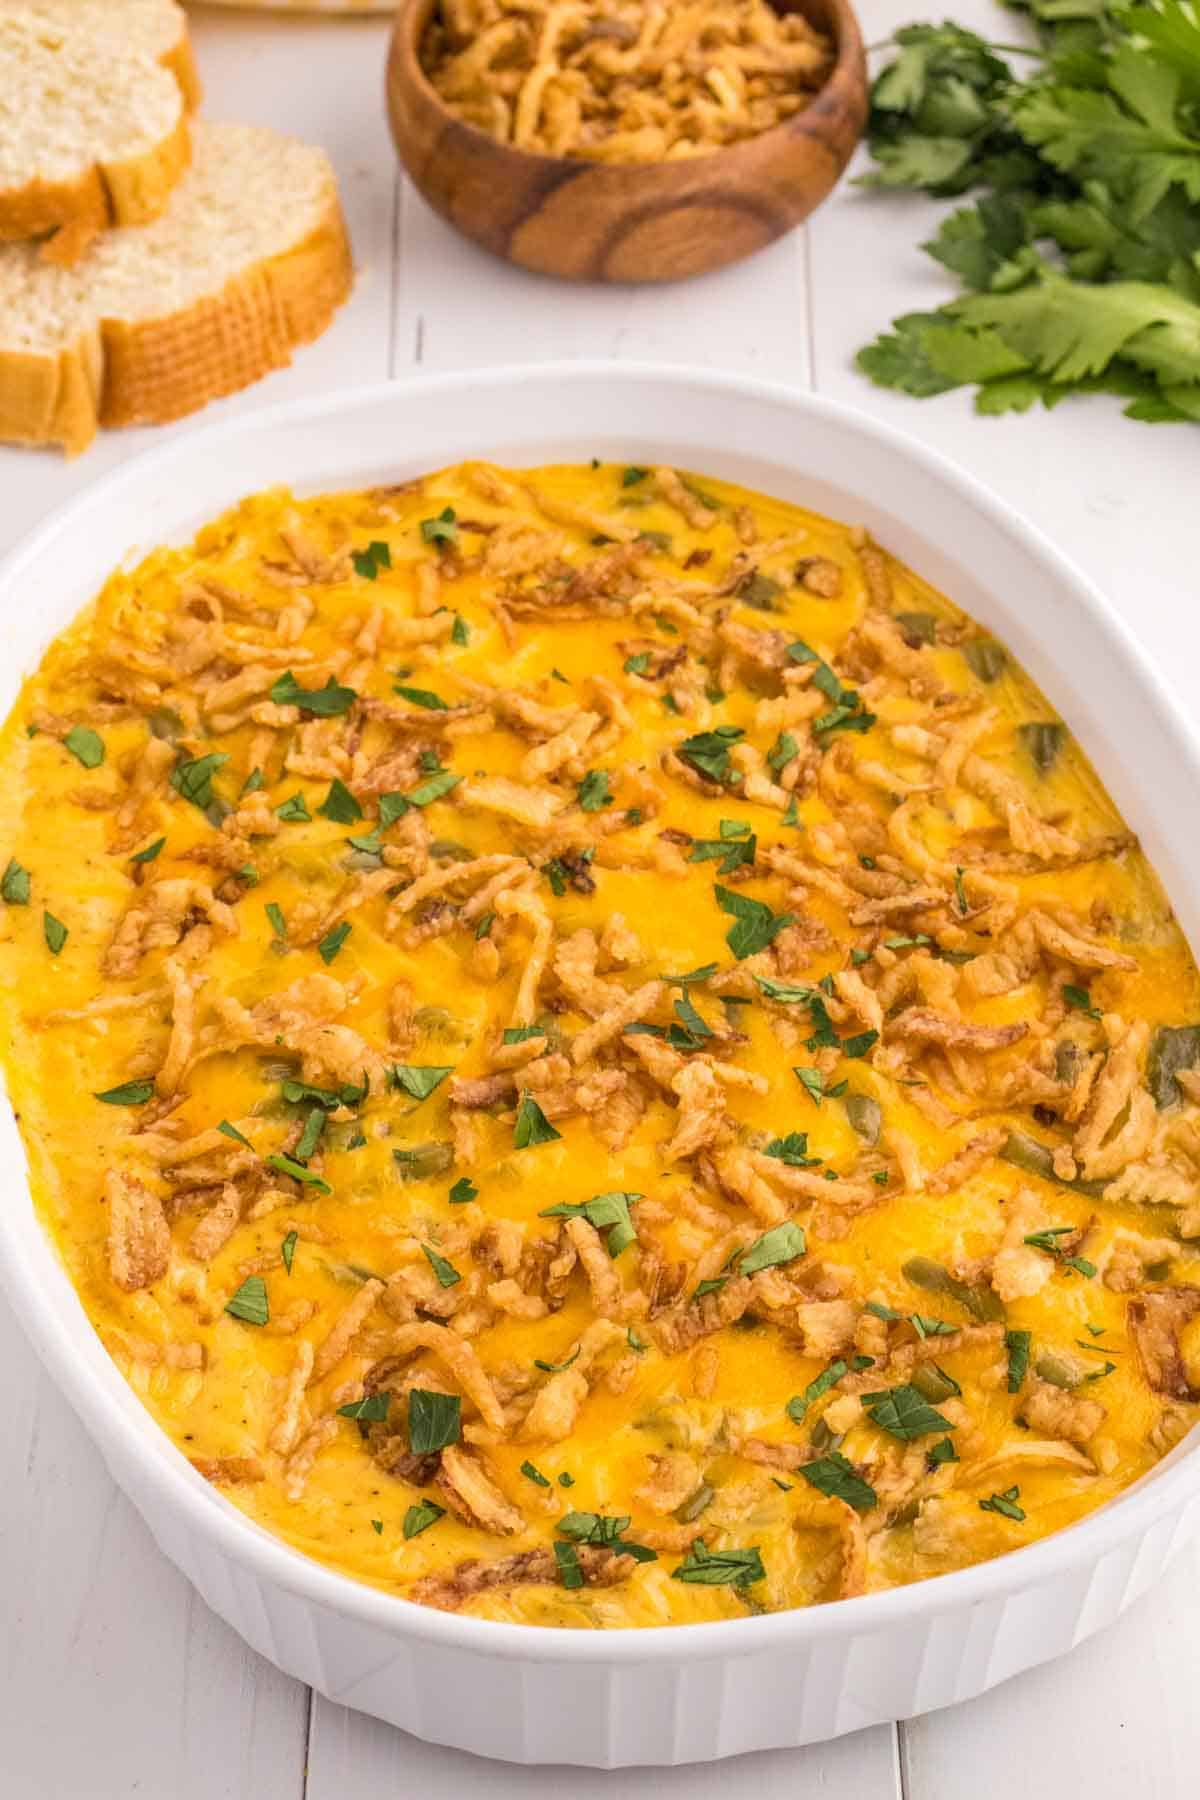 Green Bean Casserole with Velveeta is a classic holiday side dish made with canned green beans, cream of mushroom soup, Velveeta, shredded cheddar cheese and French's crispy fried onions.